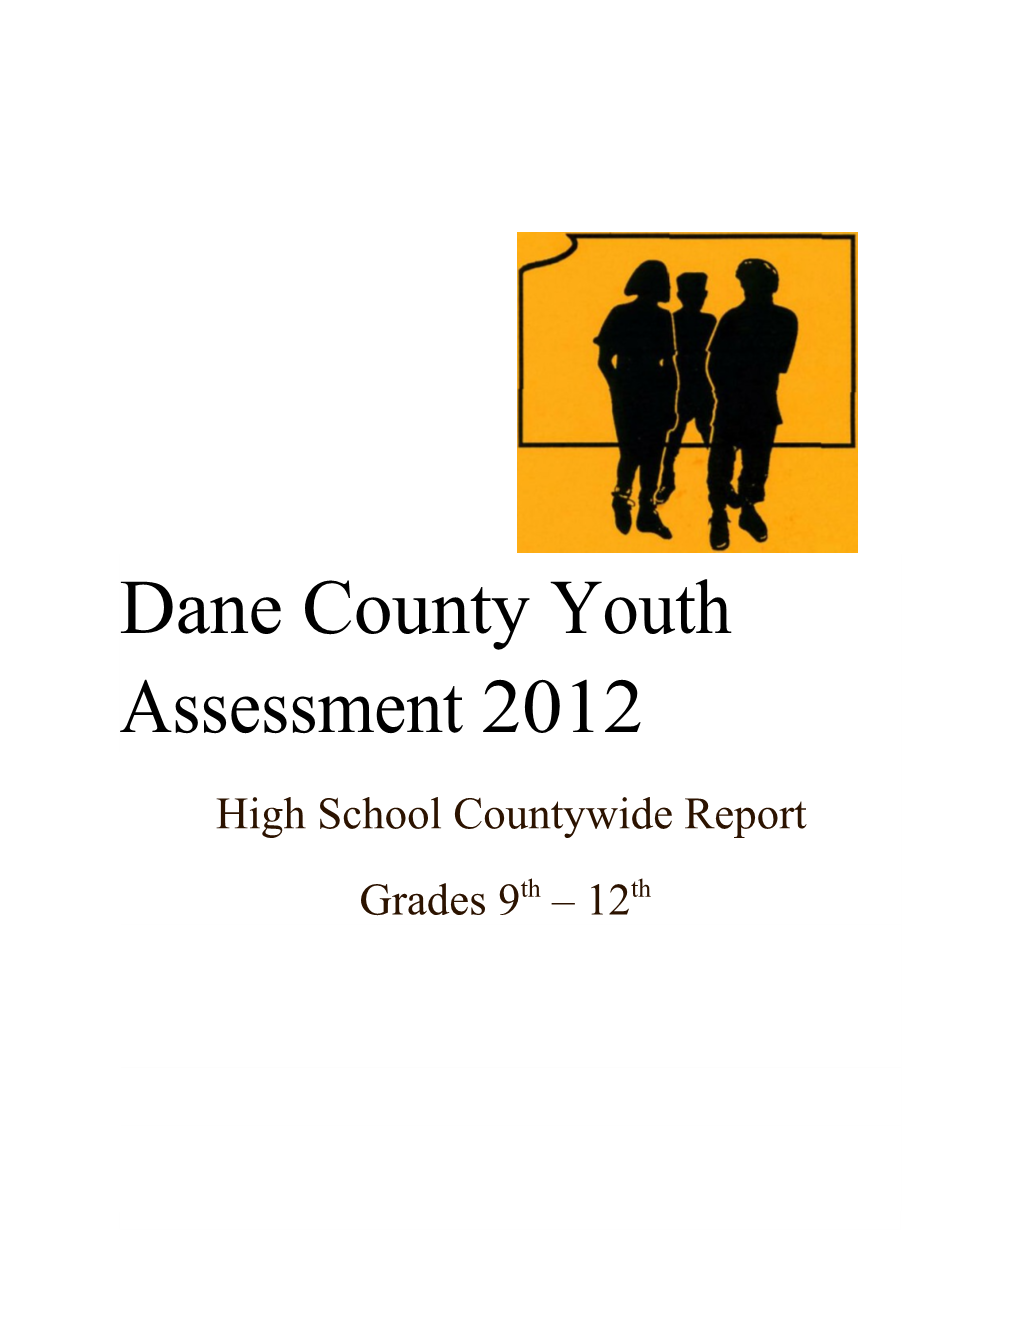 Dane County Youth Assessment 2012